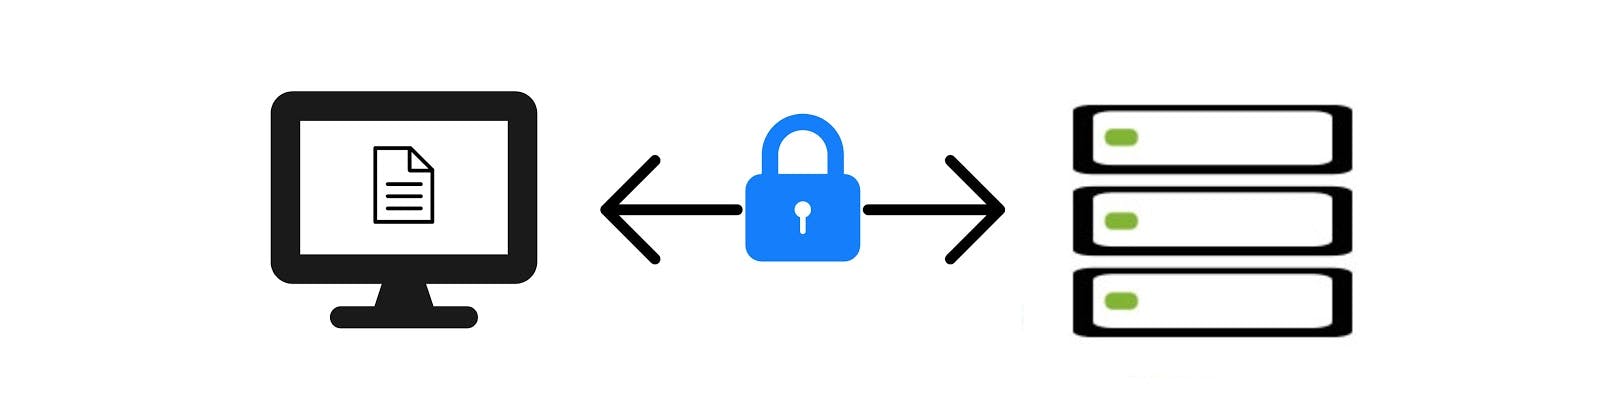 Secure file transfer via FTP between client and server.